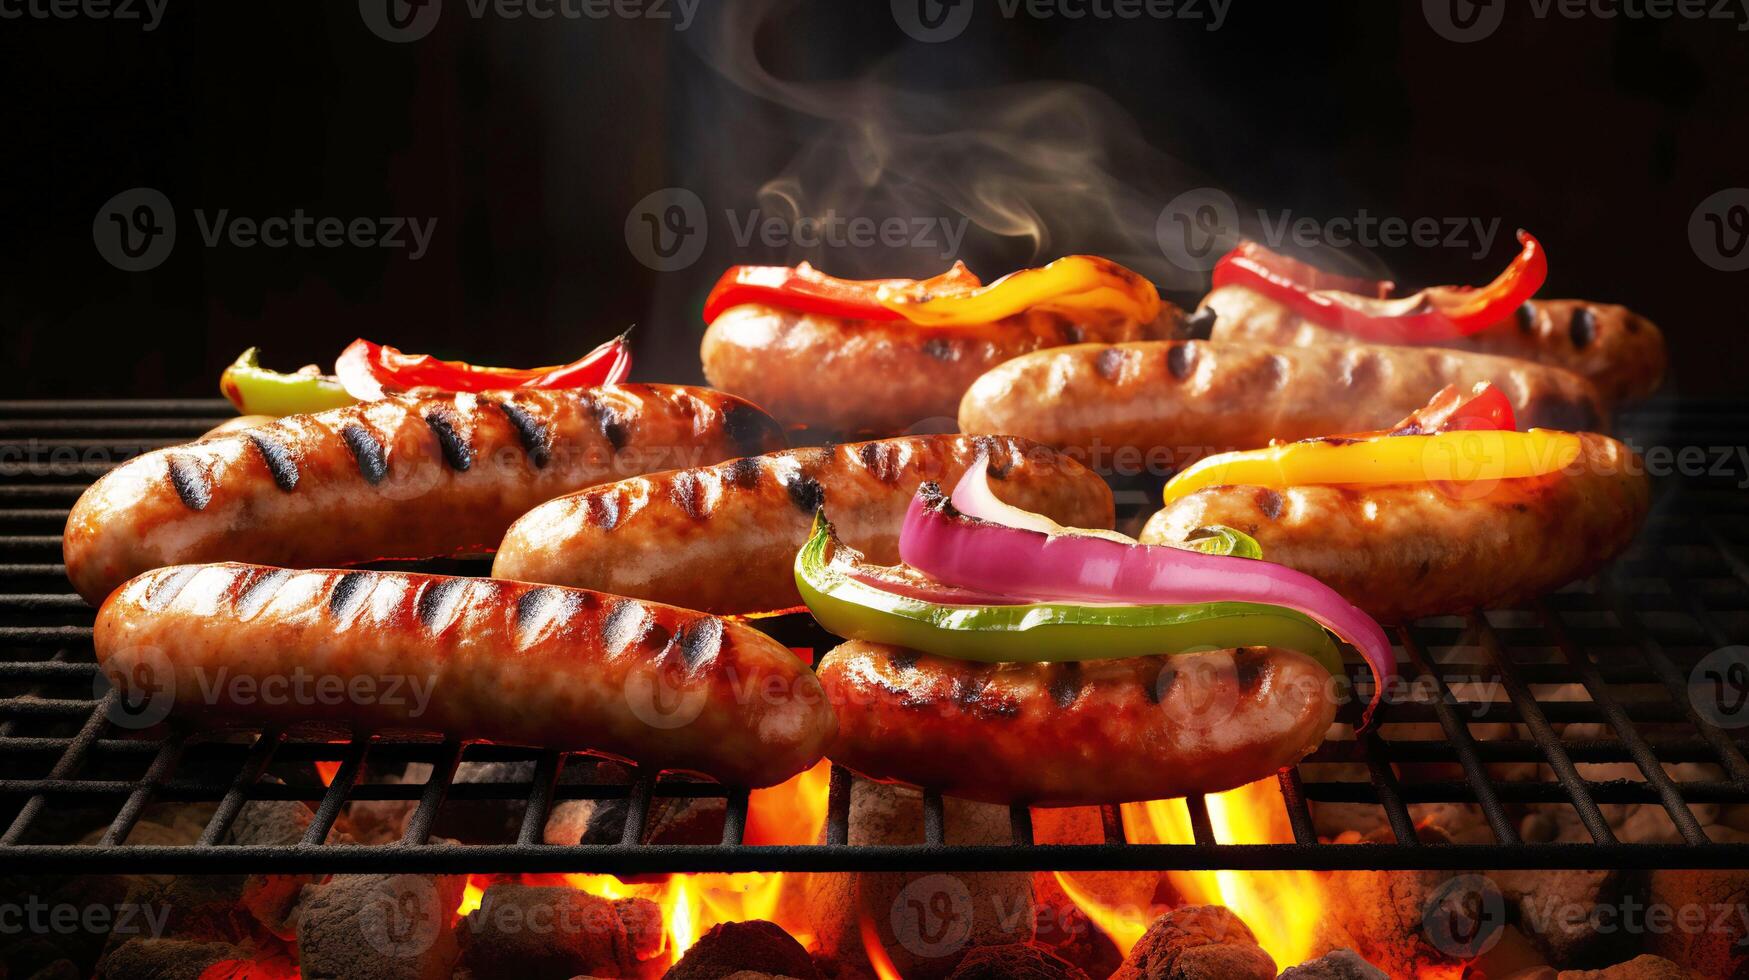 Grilled sausages and vegetables on a flaming BBQ grill. A delicious food poster for summer dining. photo